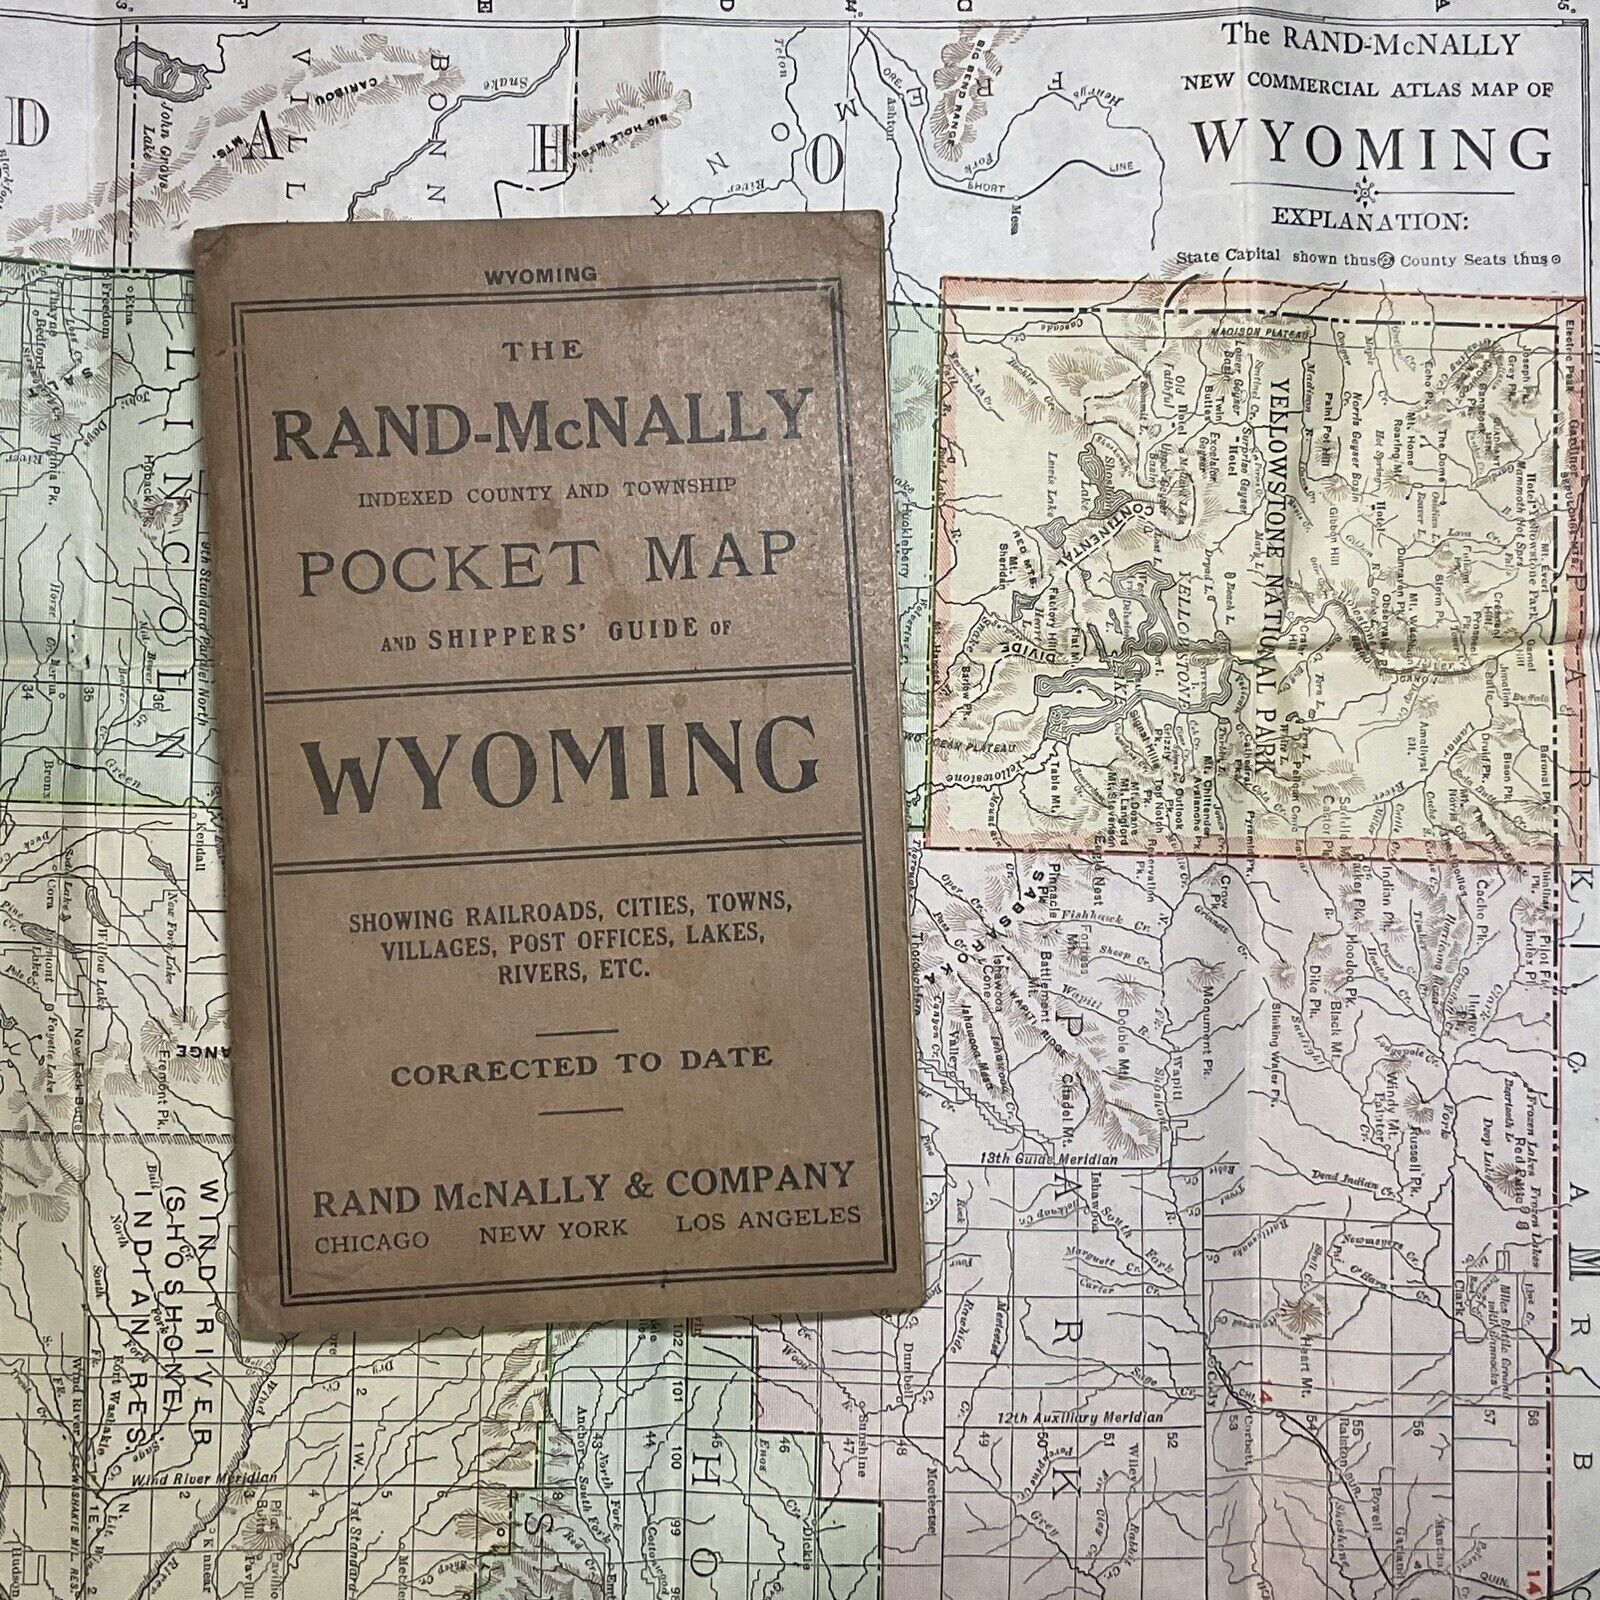 WYOMING- 1914 - RAND-McNALLY POCKET MAP & SHIPPERS' GUIDE - 28”X21” VINTAGE MAP